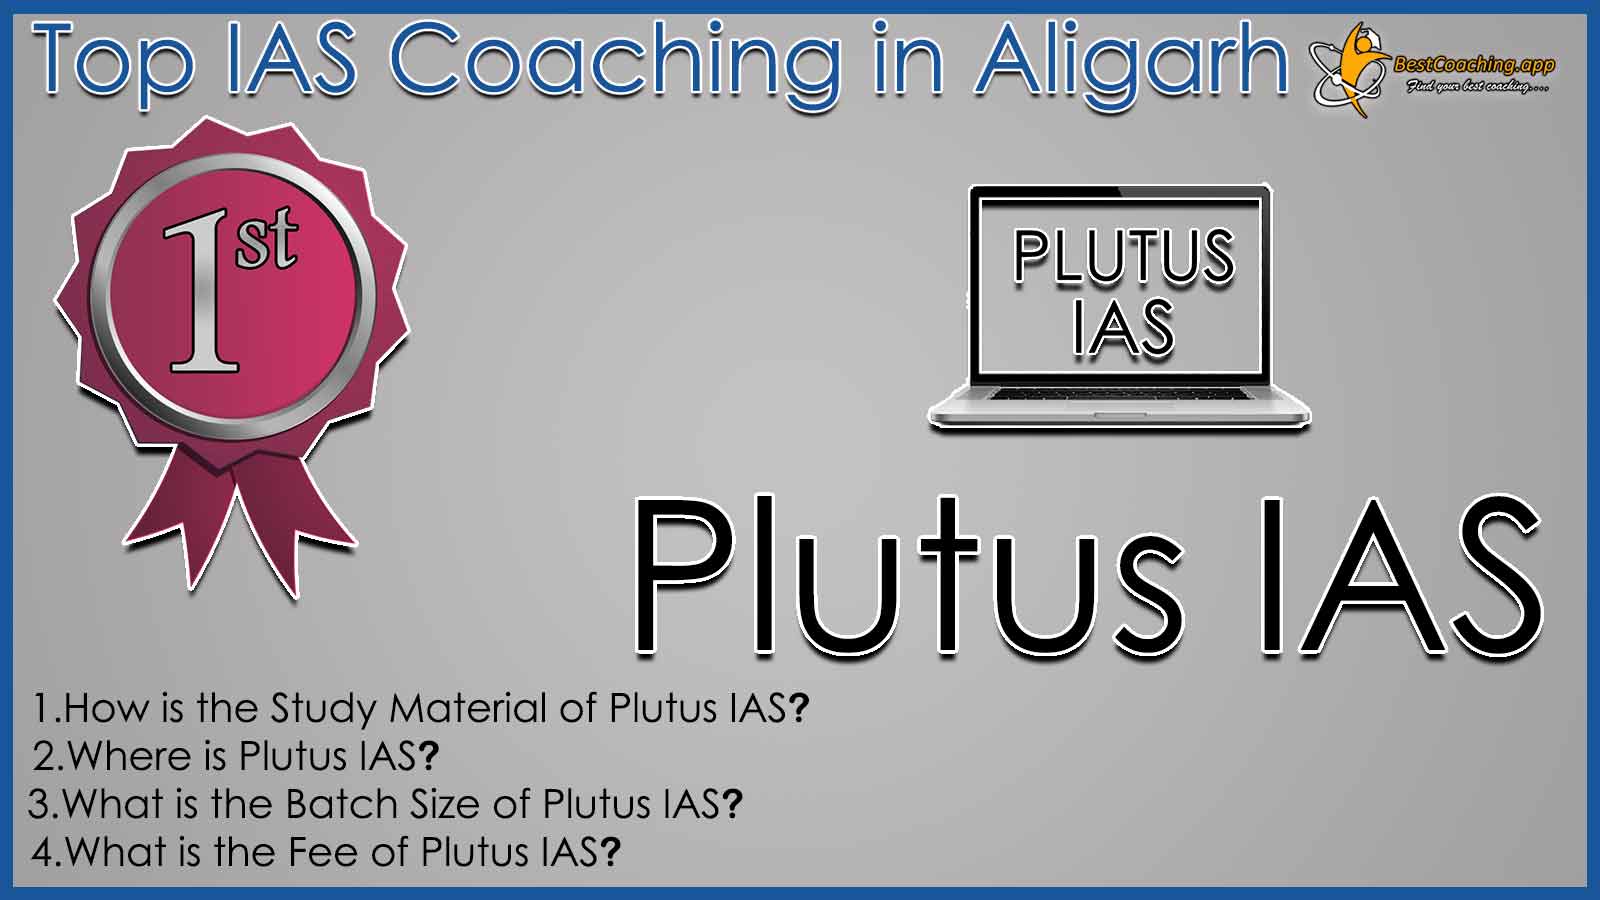 Details of the Best IAS Coaching in Aligarh